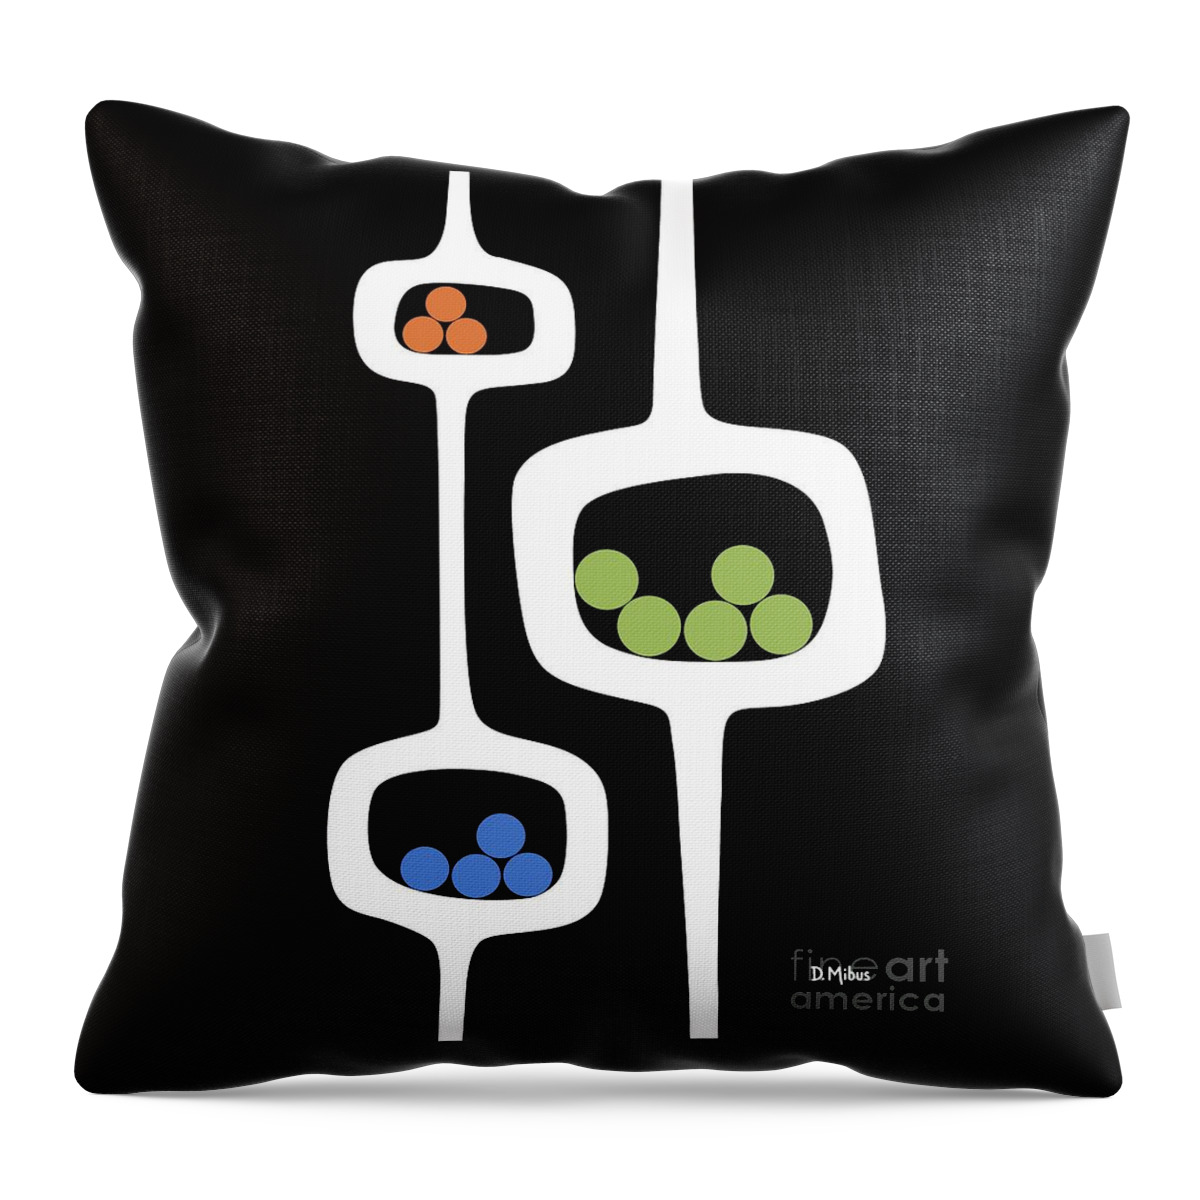 Mid Century Pods Throw Pillow featuring the digital art Mod Pod 3 with Circles on Black by Donna Mibus